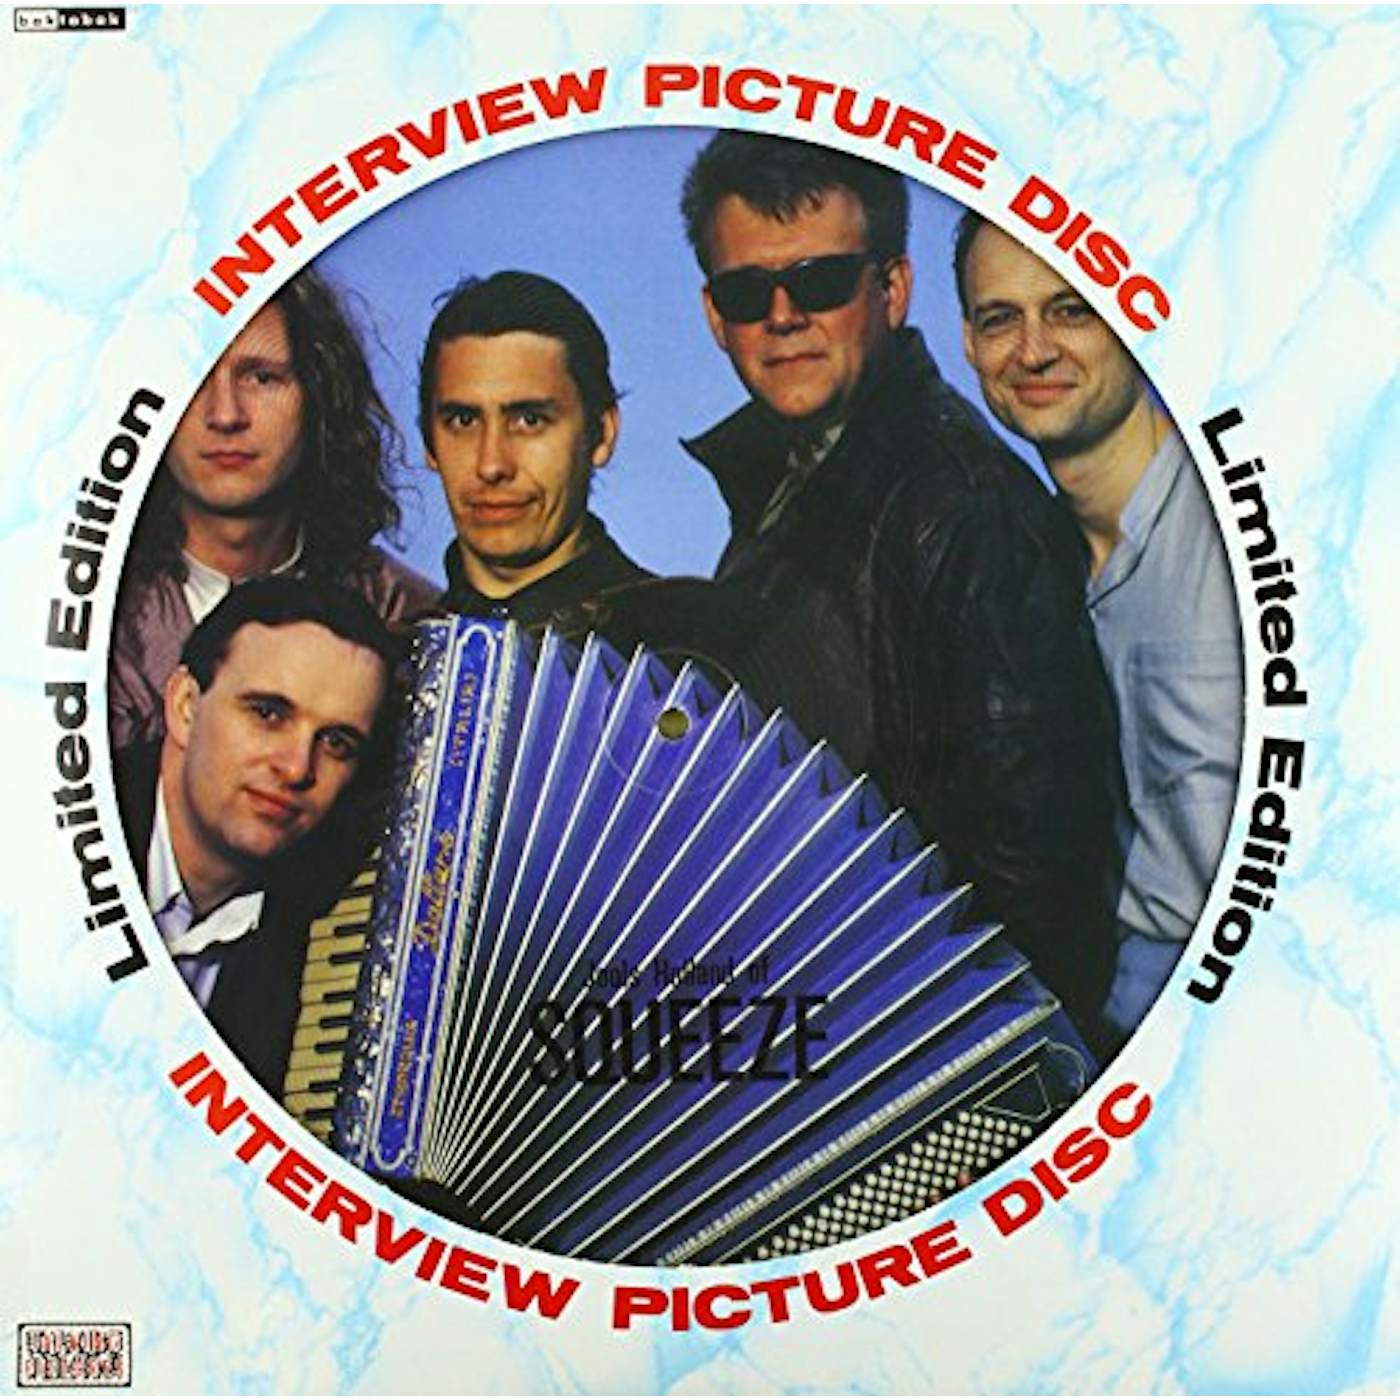 Squeeze INTERVIEW PICTURE DISC Vinyl Record